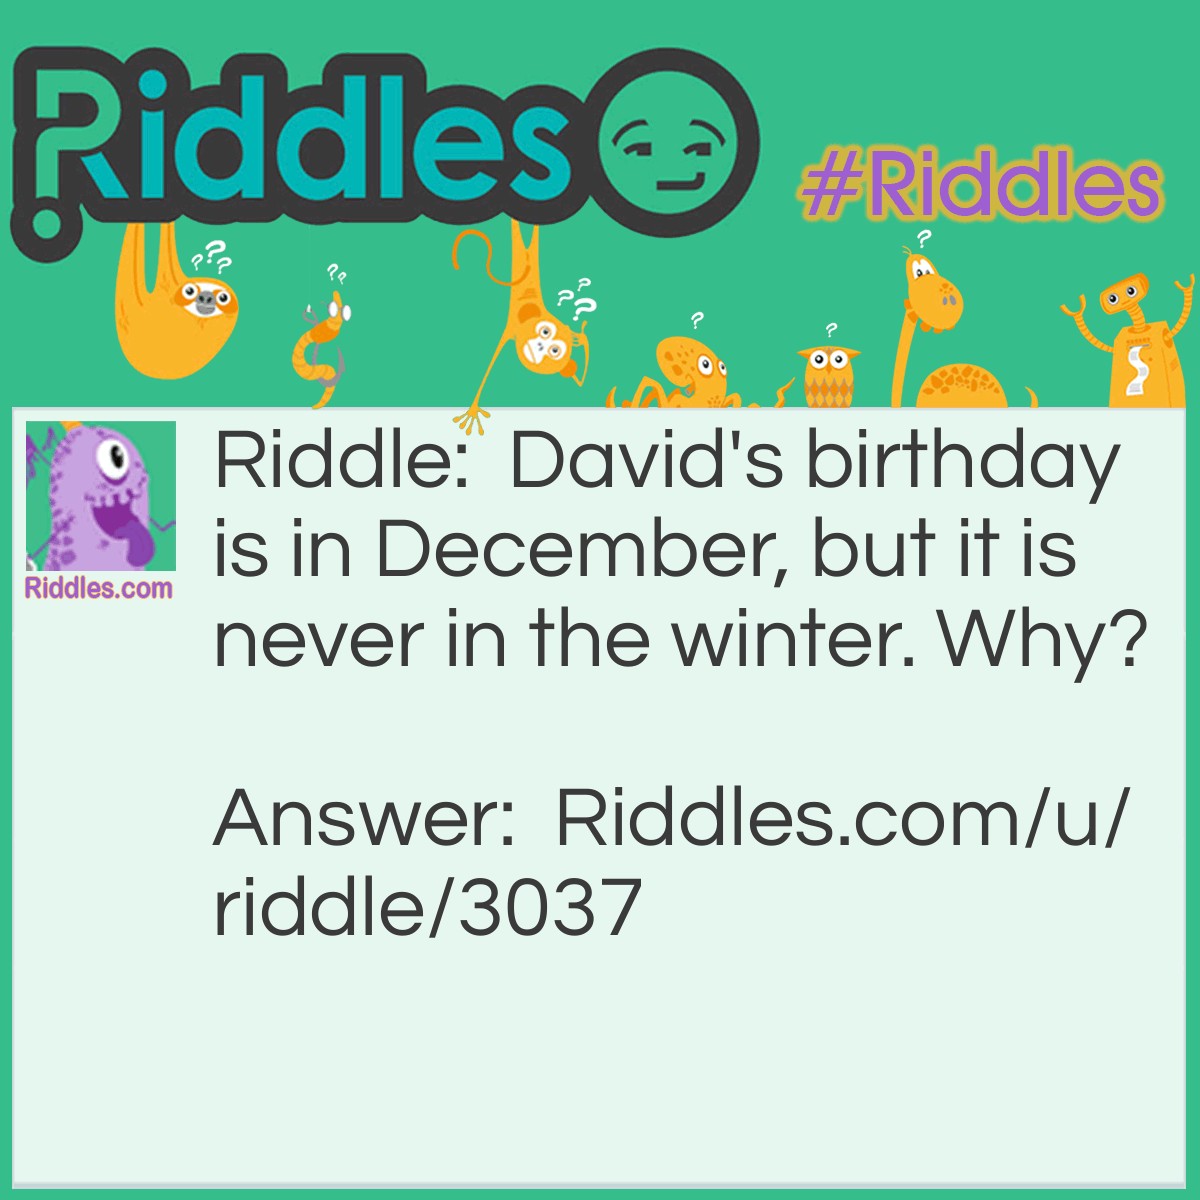 Riddle: David's birthday is in December, but it is never in the winter. Why? Answer: He lives in Australia (or any other country that has December in summer)